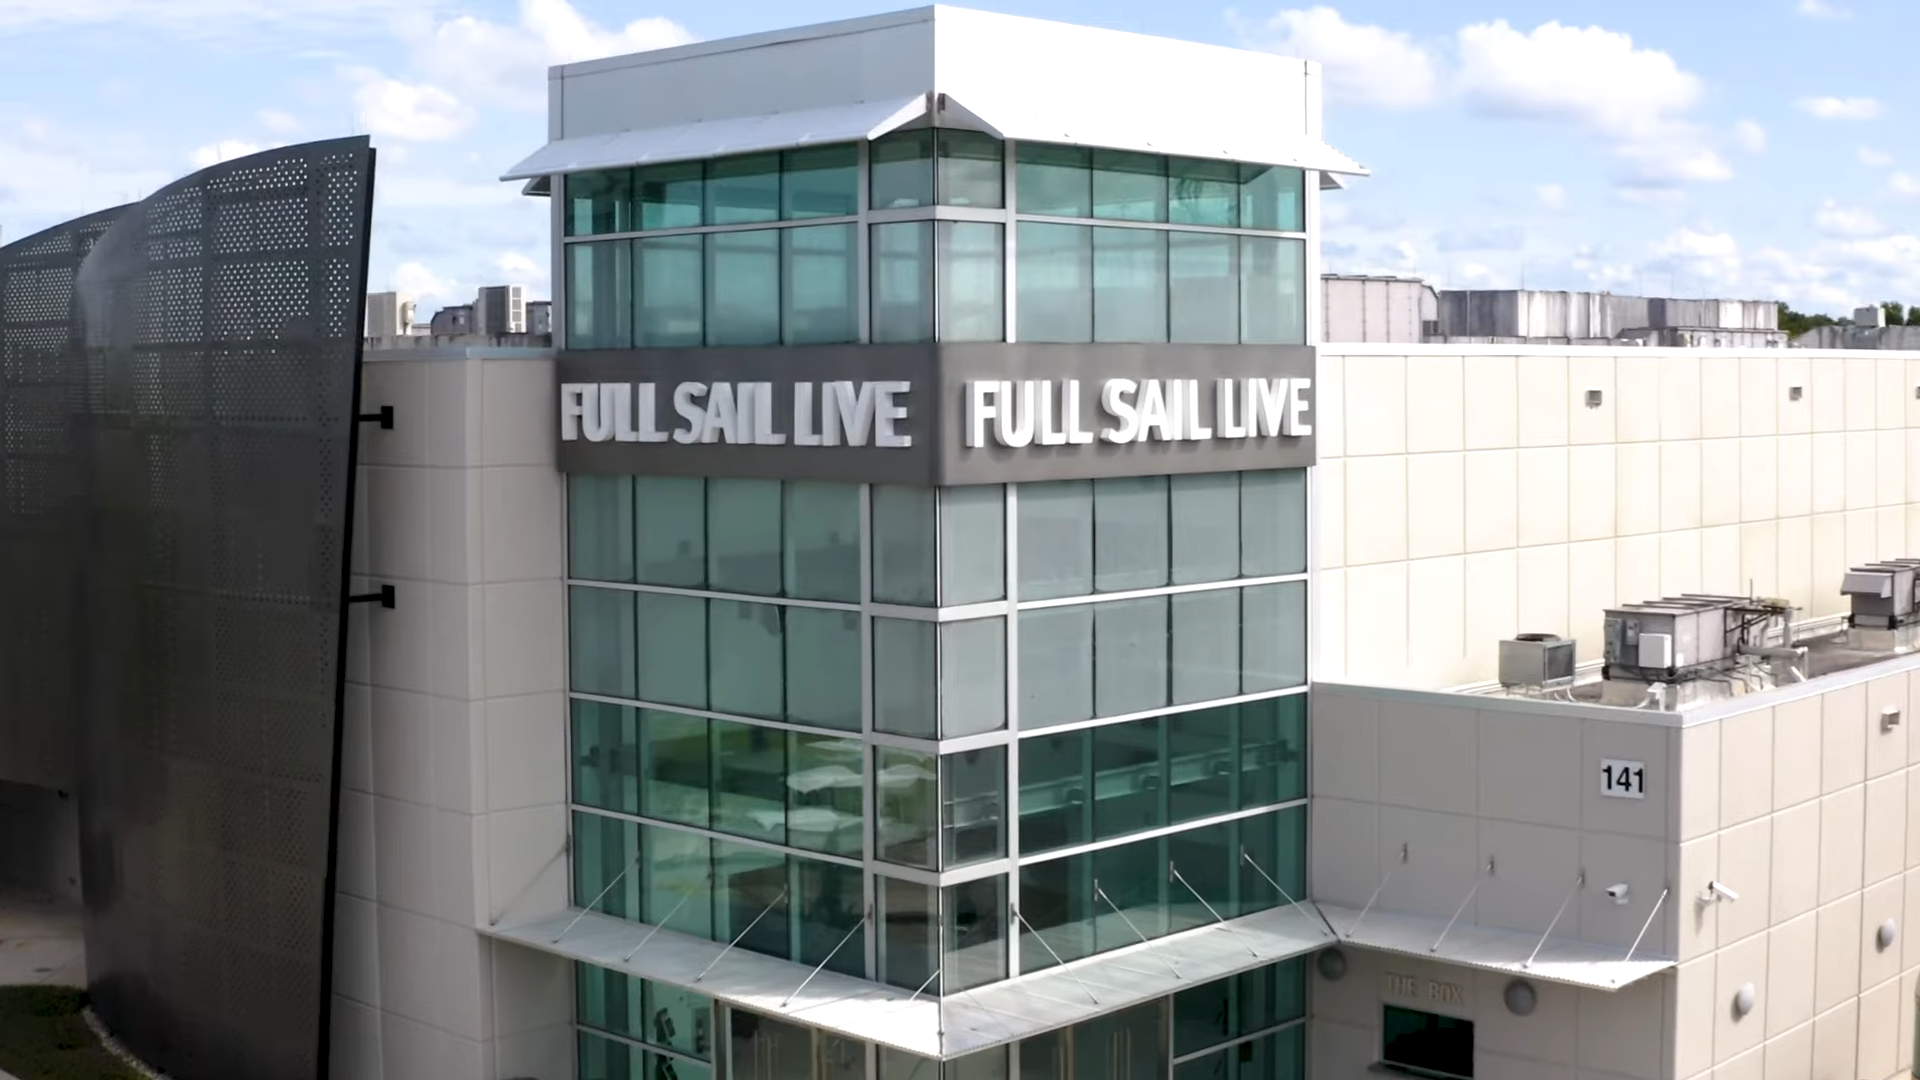 What Causes the Graduation Rate to Be so Low at Full Sail University